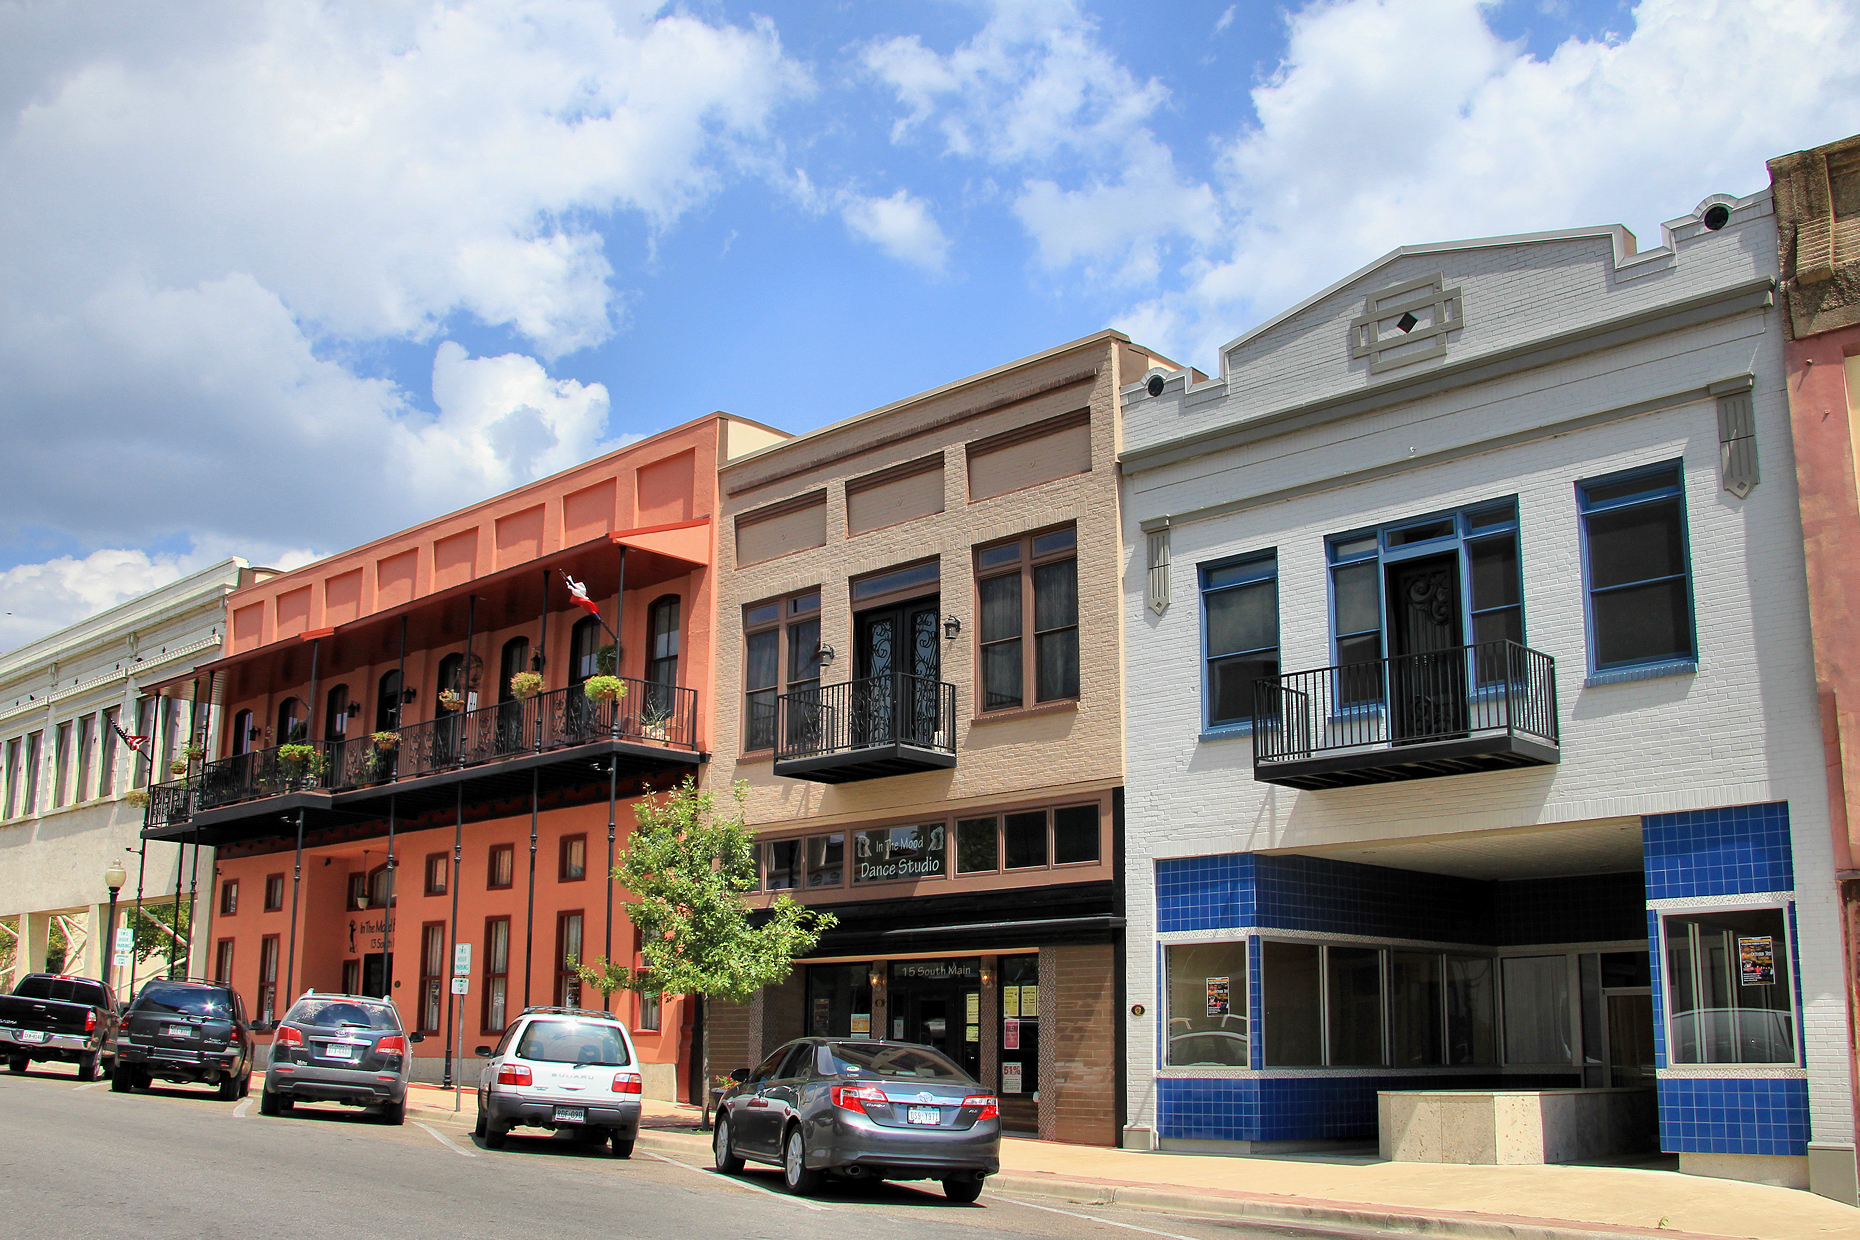 Historic building in downtown Temple Texas